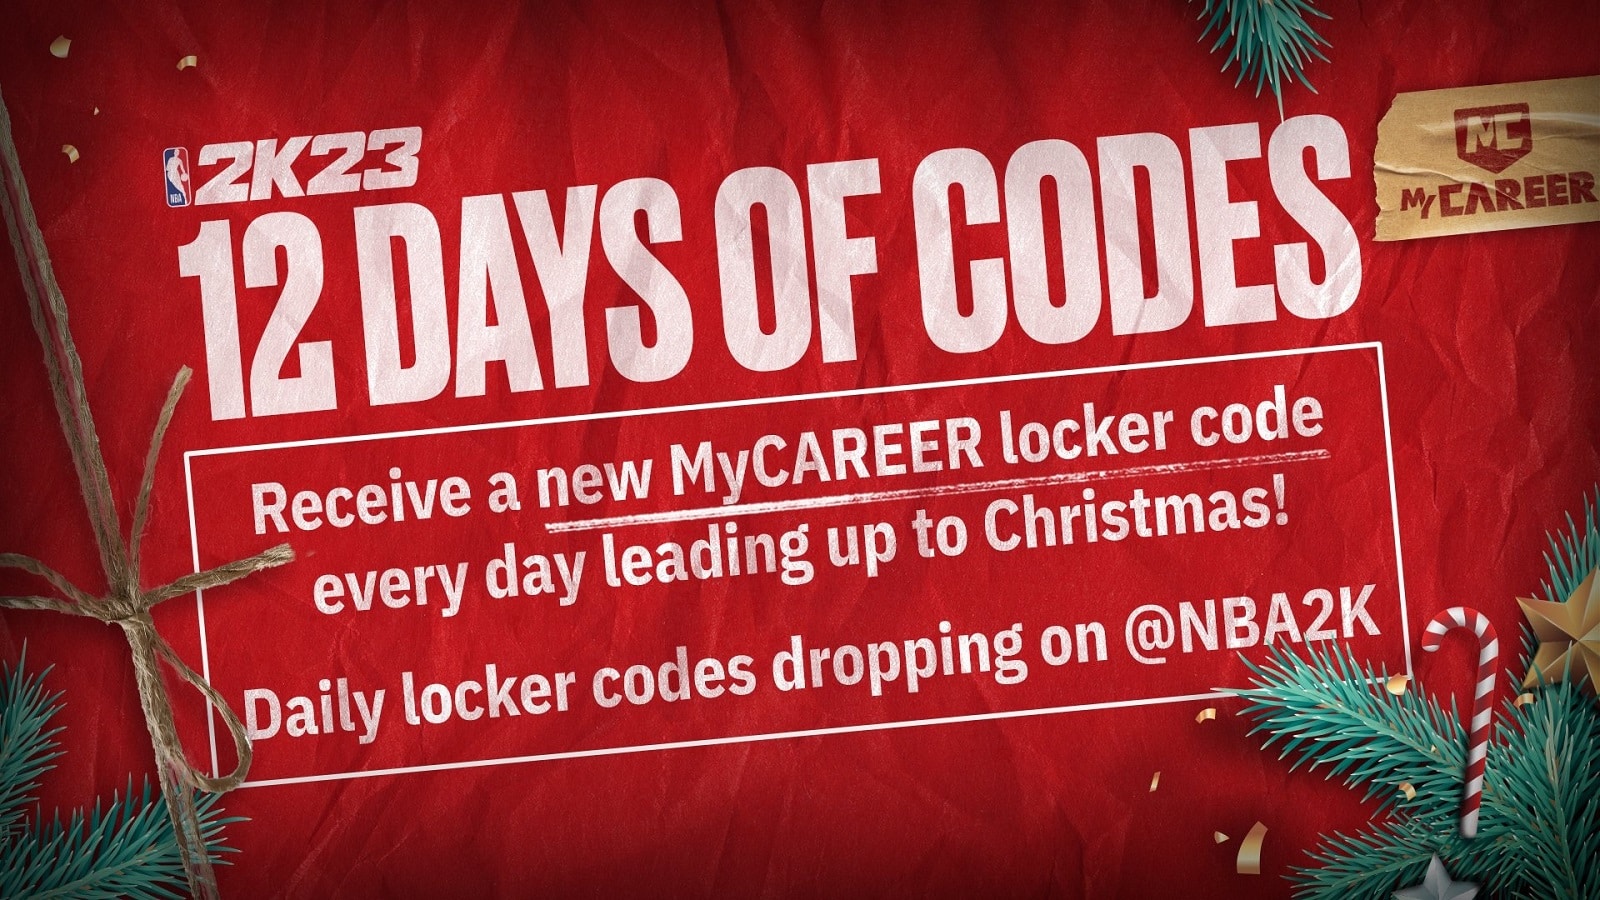 Christmas Events for NBA 2K23 MyCareer: What We Currently Know